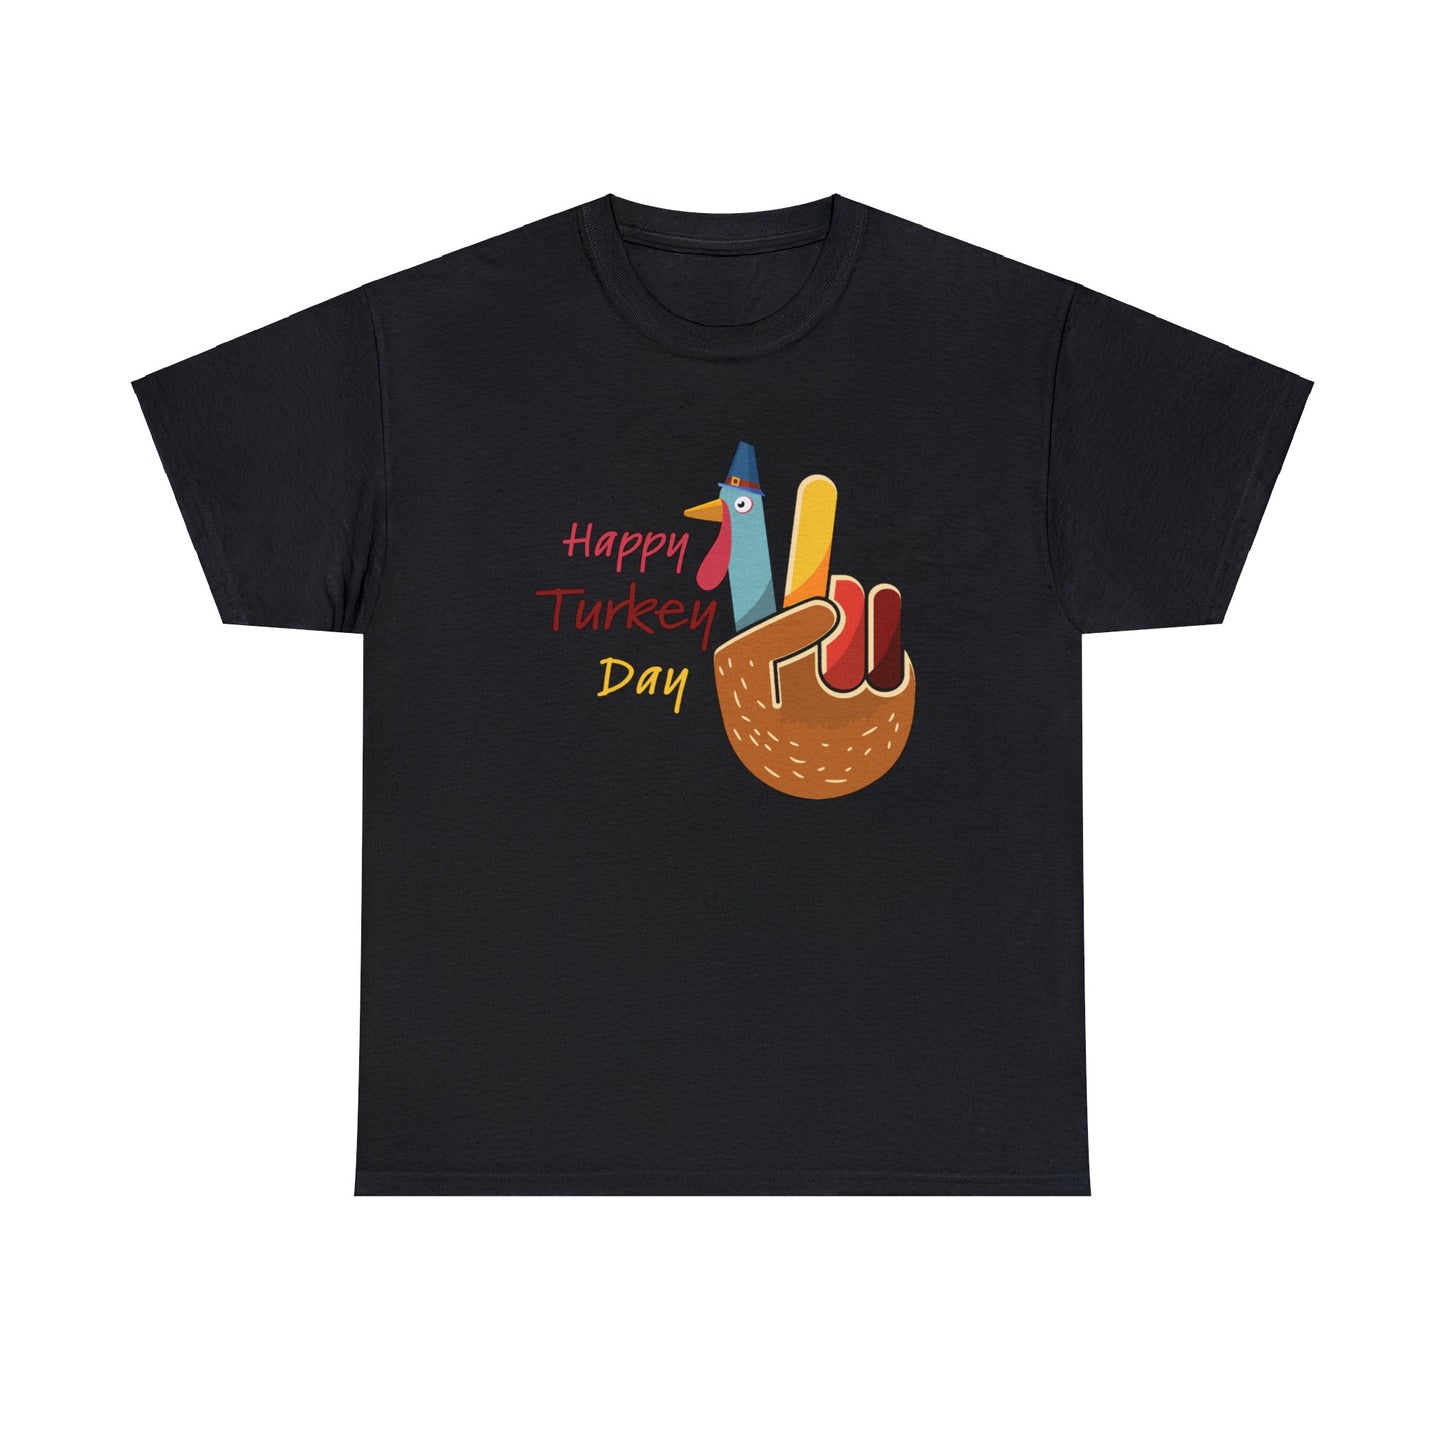 Turkey T-Shirt For Thanksgiving T Shirt For Peace Sign Tee For Funny Turkey Shirt